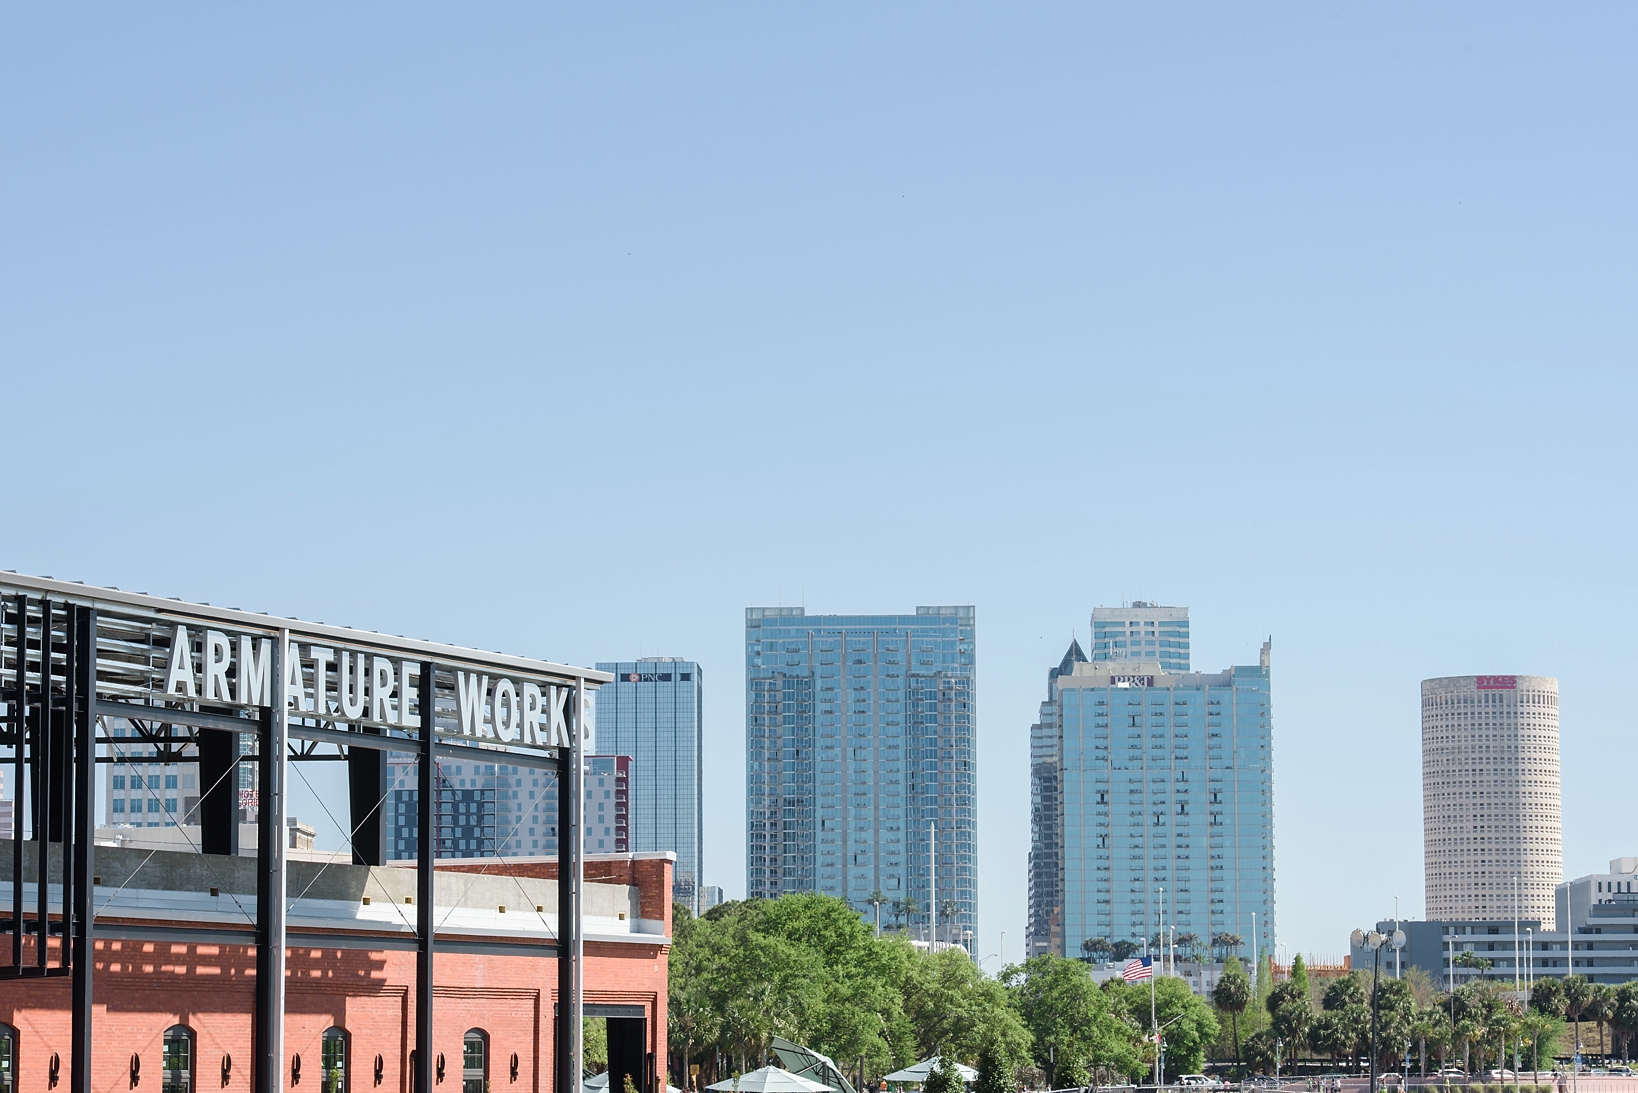 Tampa skyline with Armature Works logo and building in the forefront by Sarah & Ben Photography